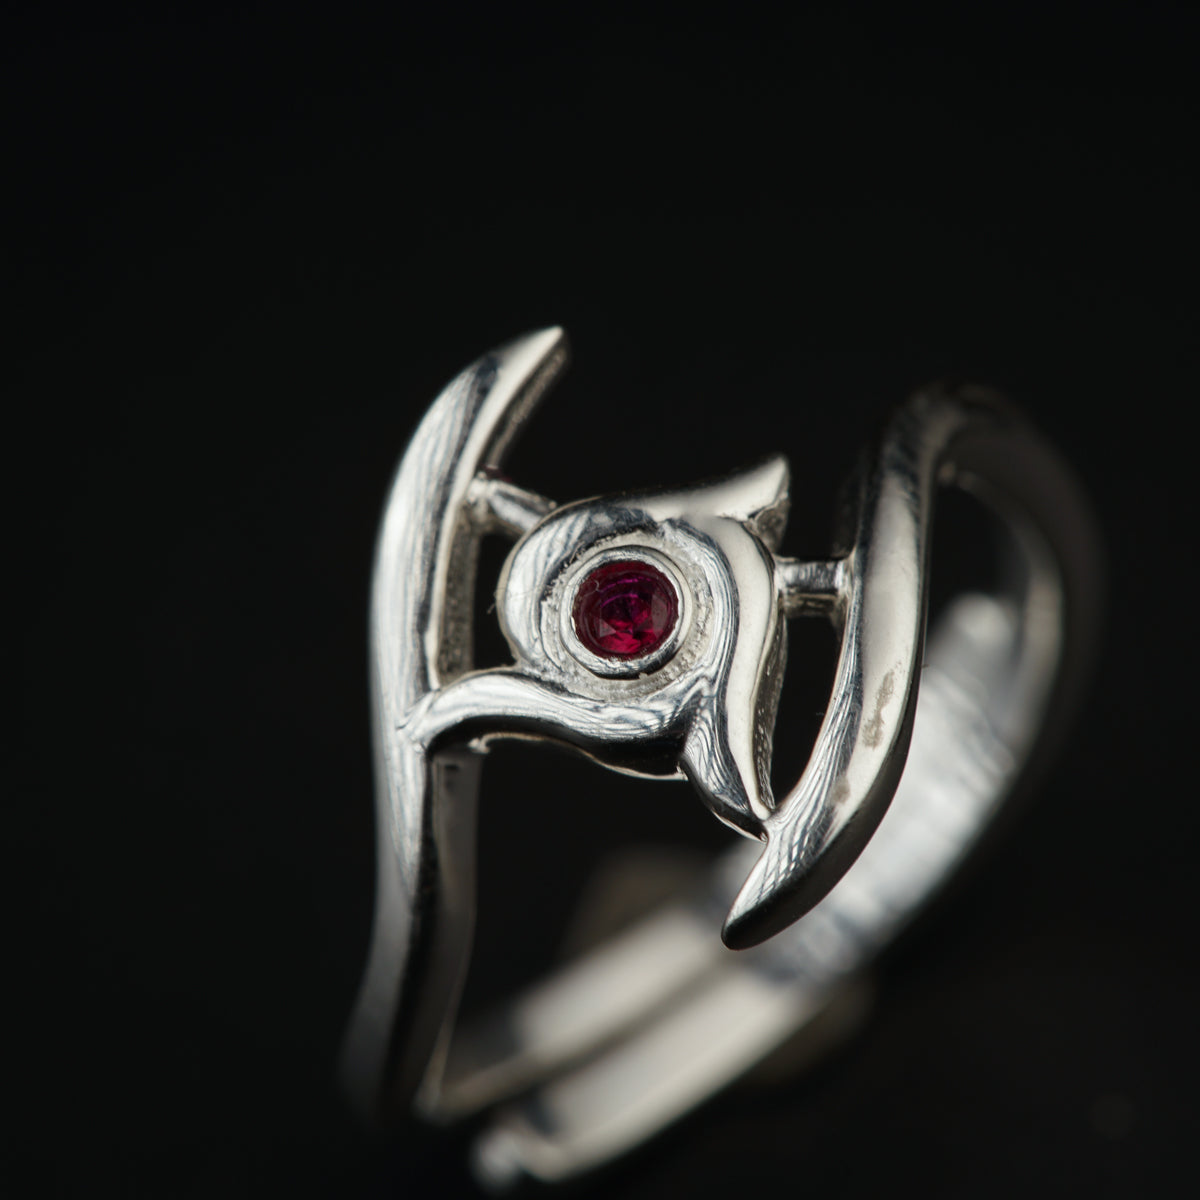 a close up of a silver ring with a red stone